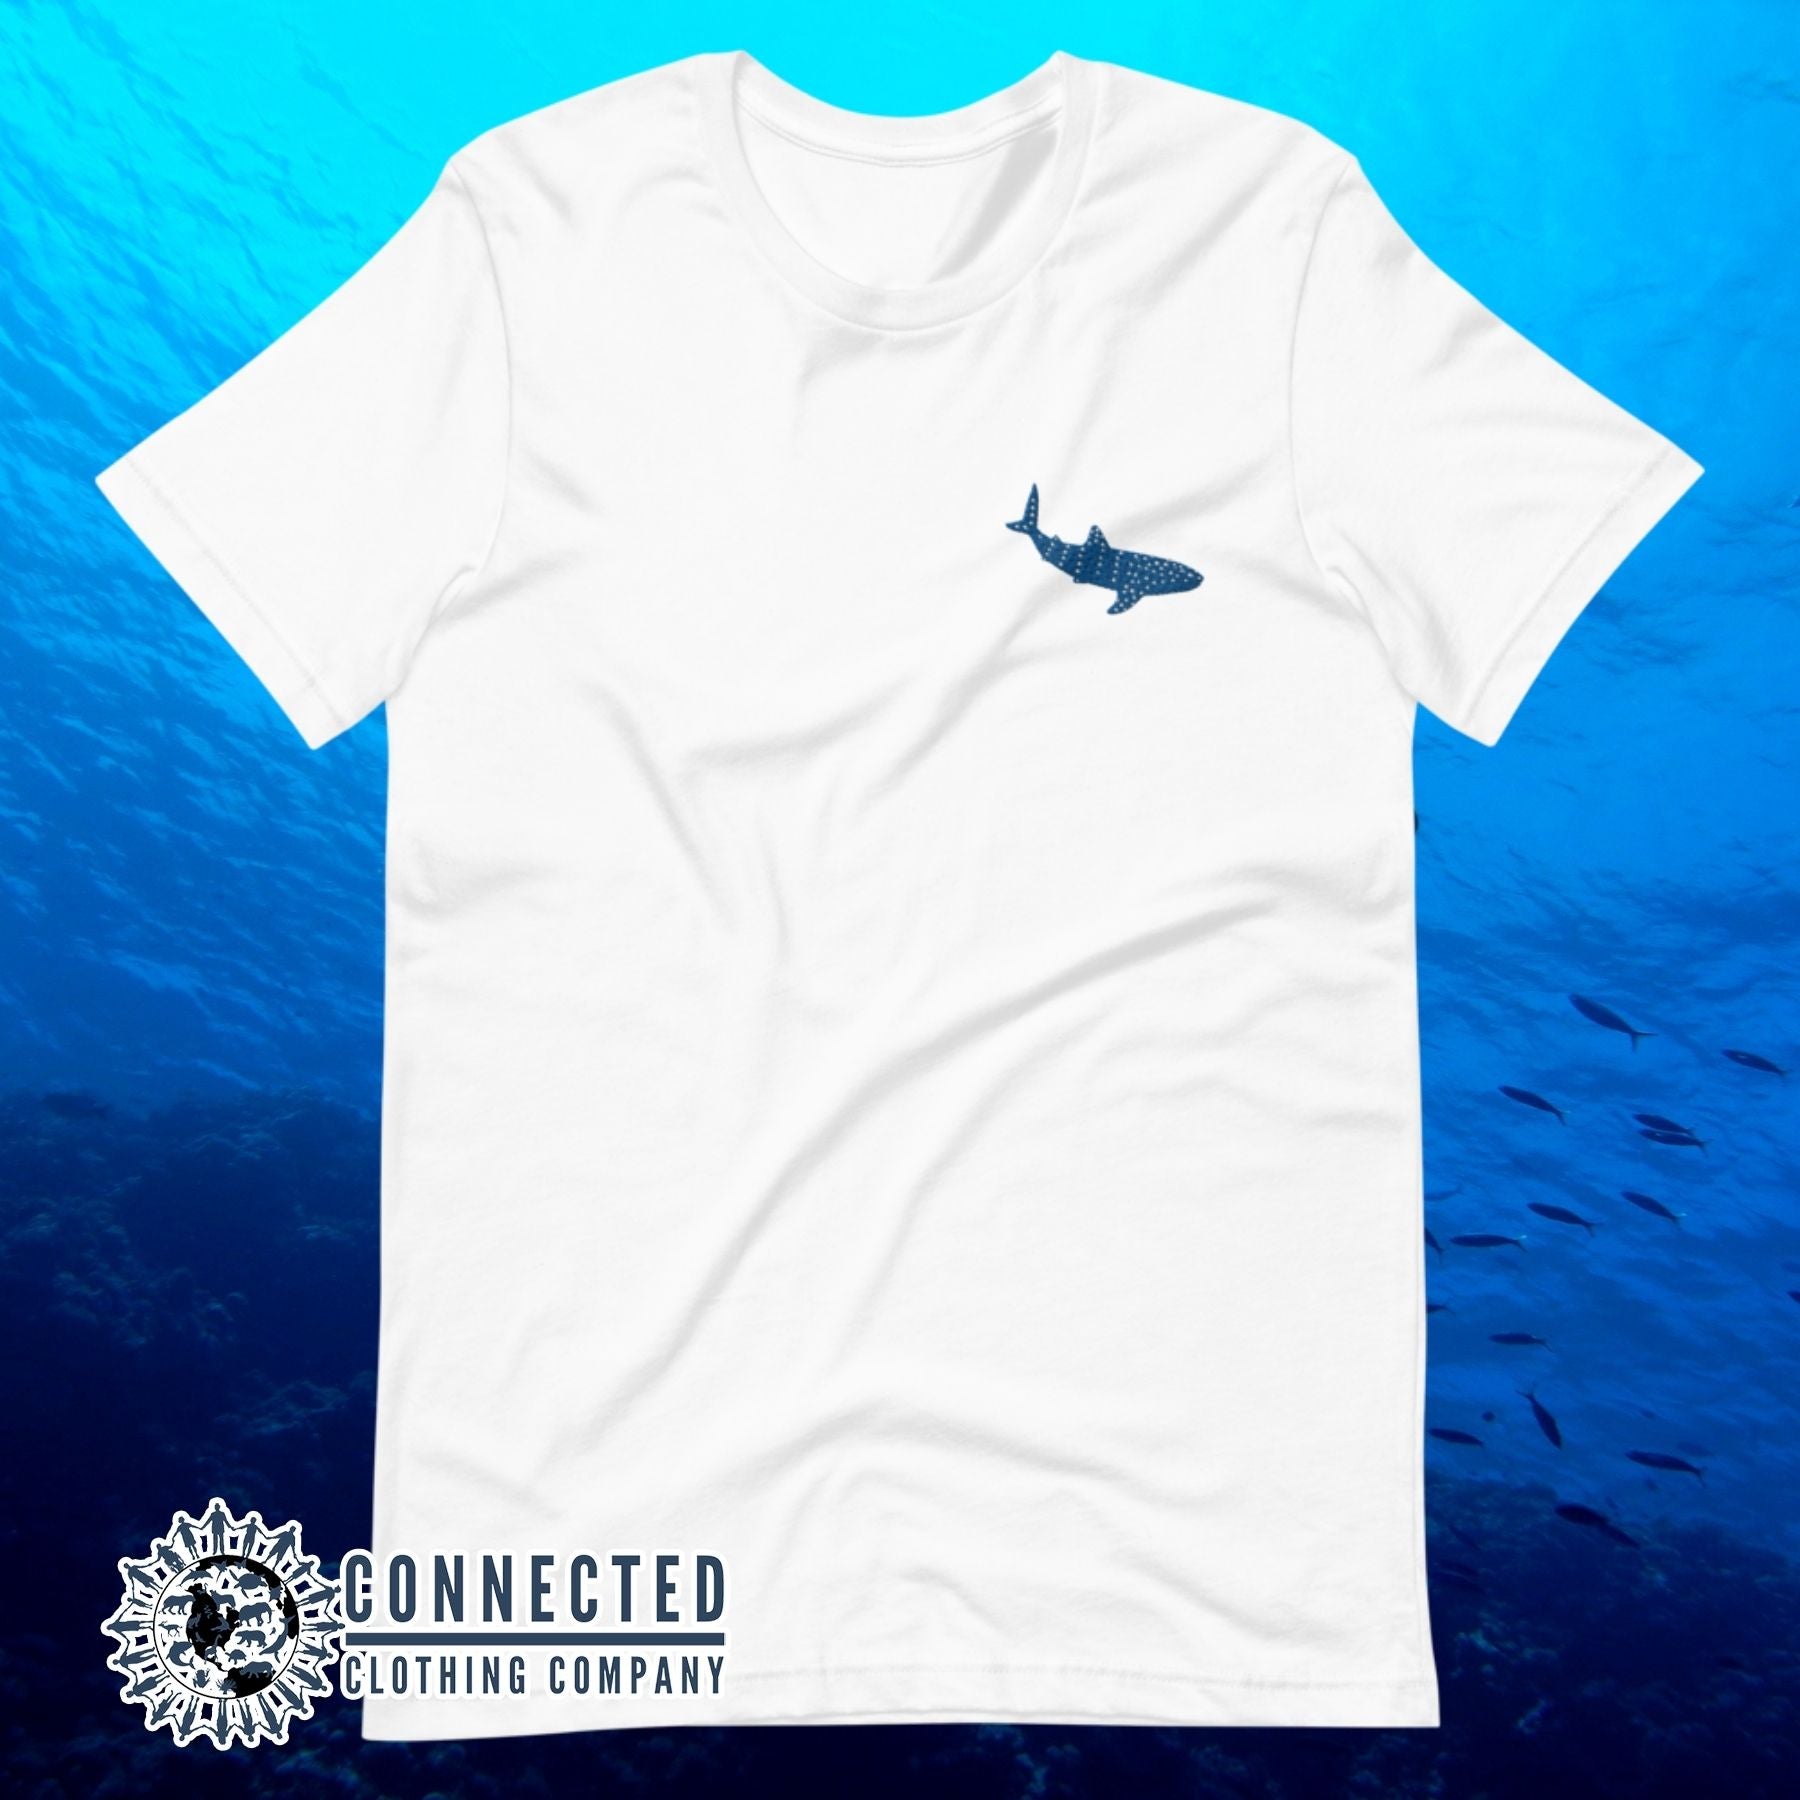 White Embroidered Whale Shark Short-Sleeve Shirt - Connected Clothing Company - Ethically and Sustainably Made - 10% of profits donated to shark conservation and ocean conservation